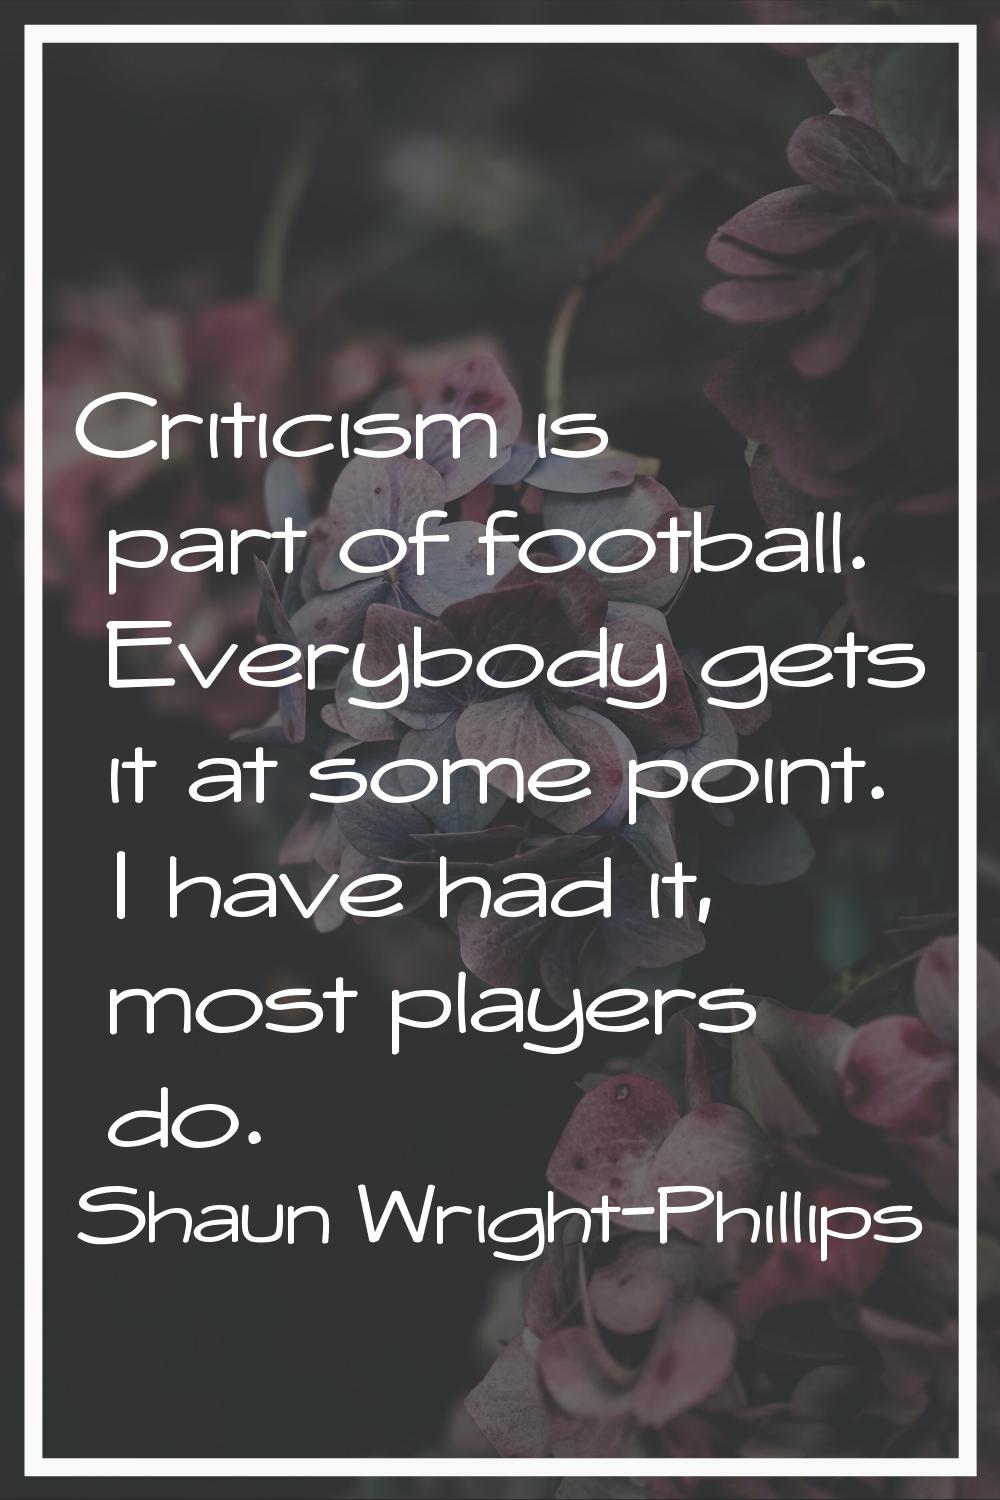 Criticism is part of football. Everybody gets it at some point. I have had it, most players do.